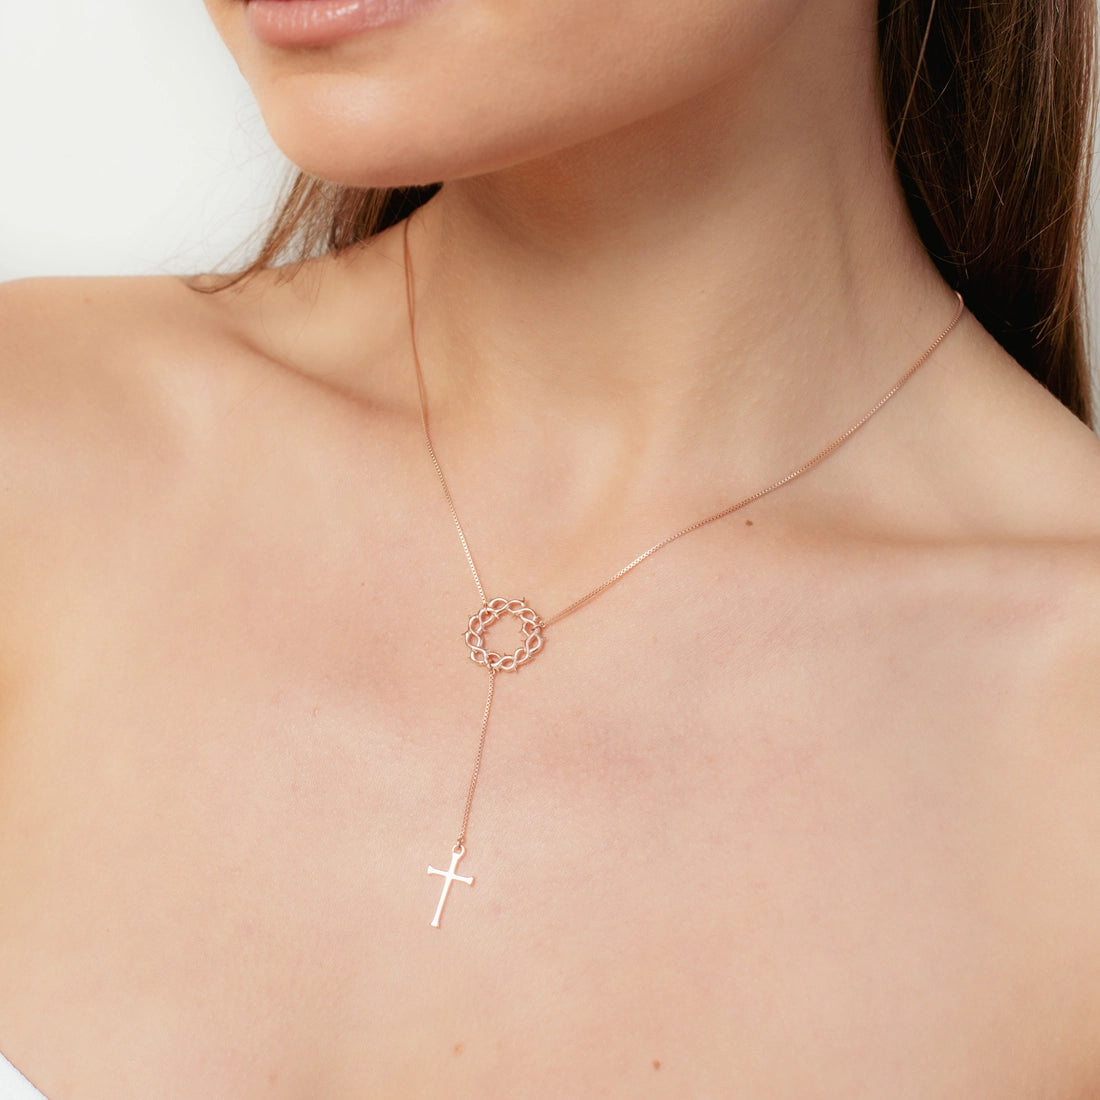 Close up of 18k rose gold vermeil Crown of Thorns Y Necklace with cross pendant from the Insignia Collection by Rizen Jewelry.